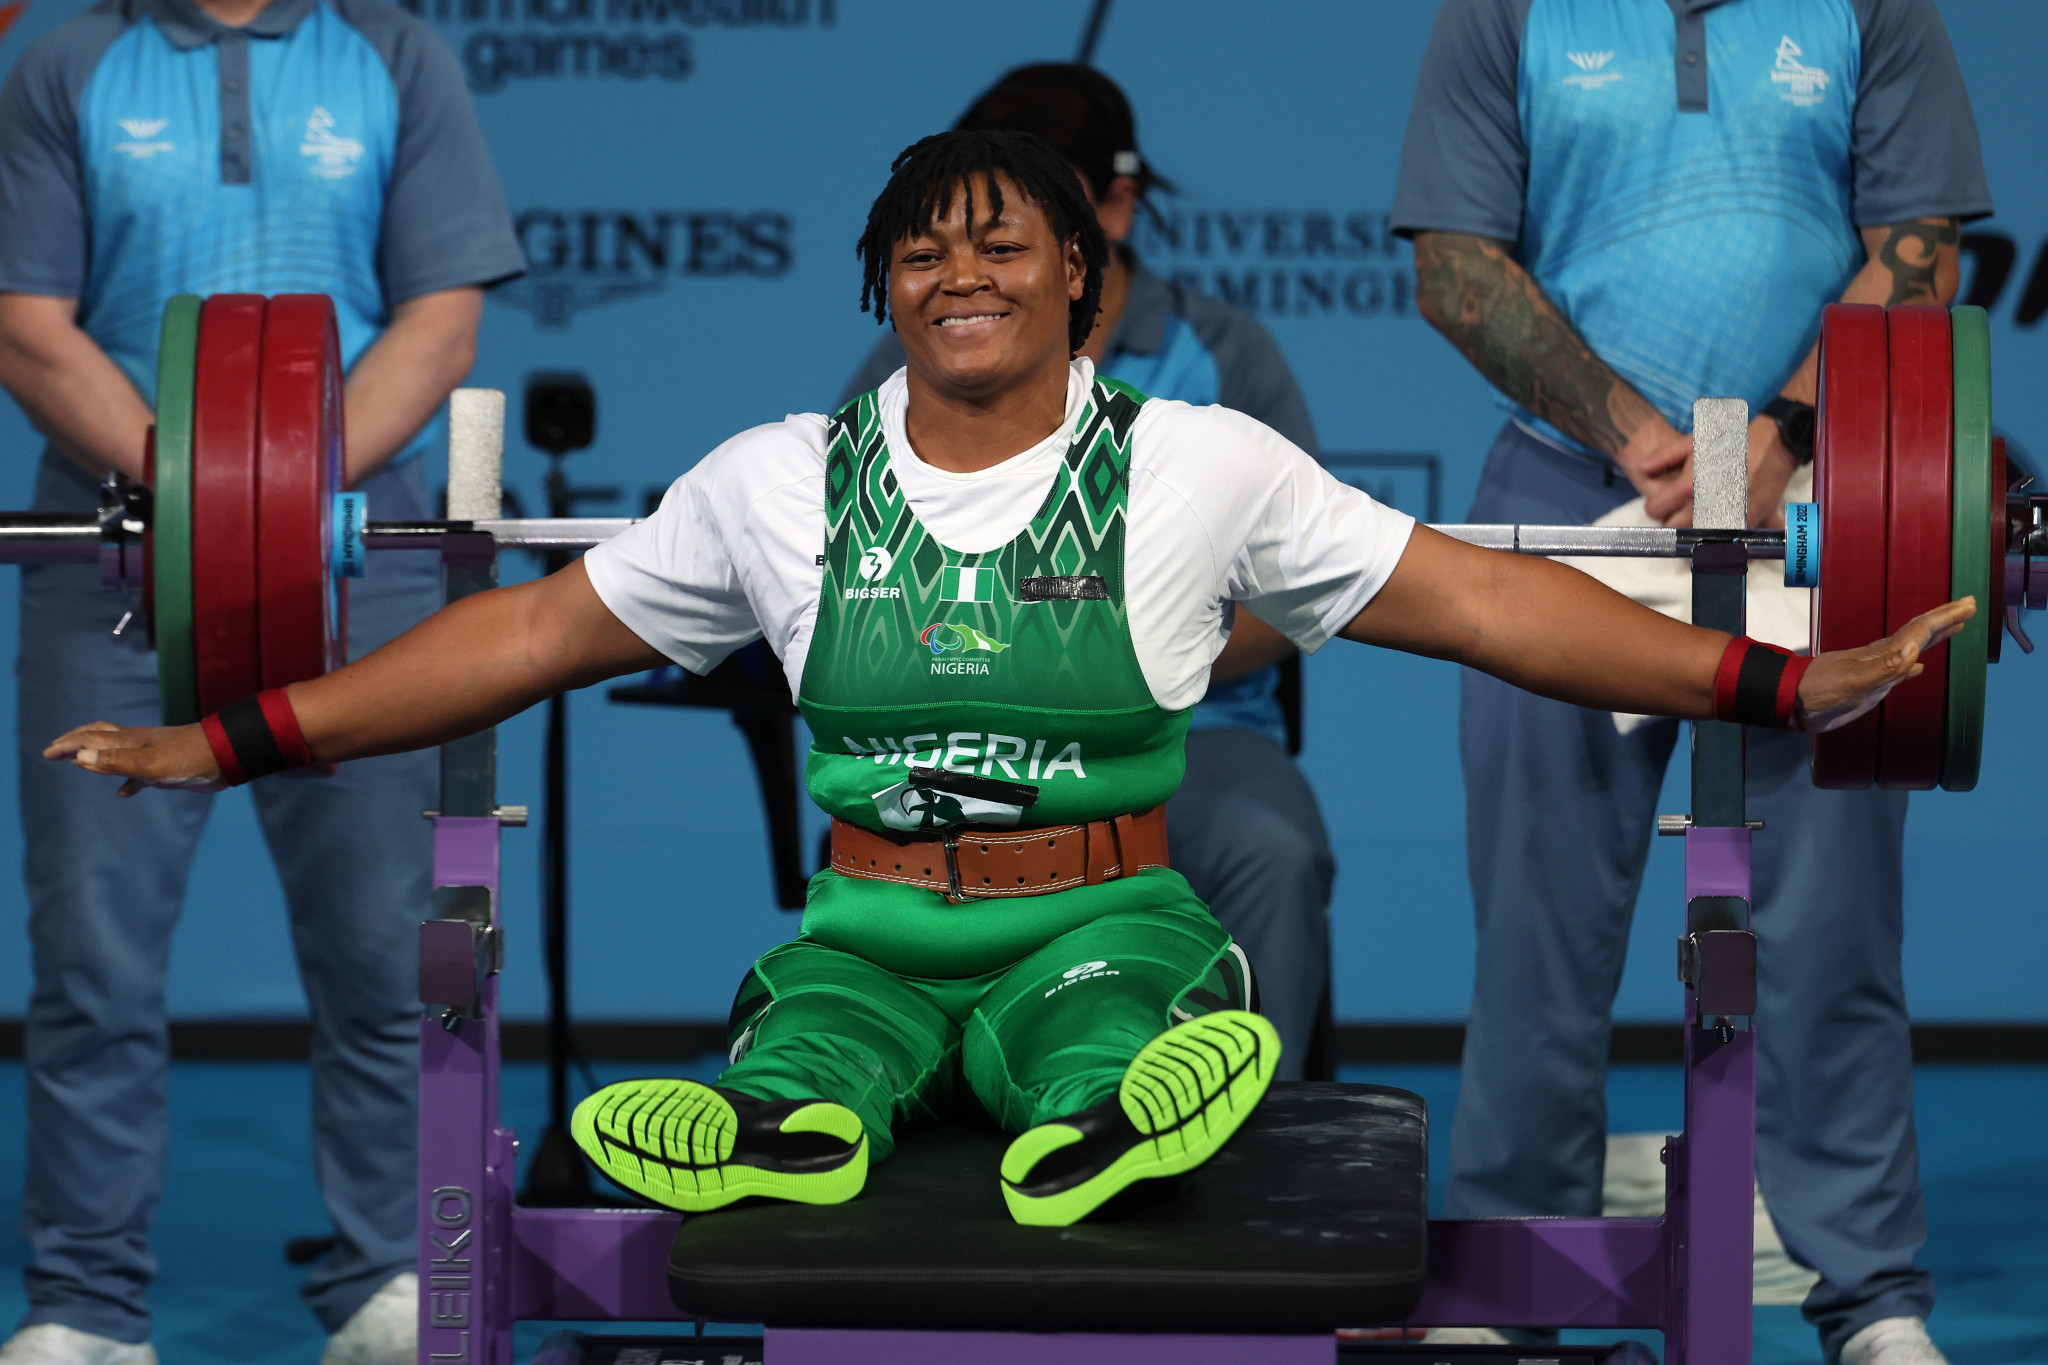 Oluwafemiayo world record provides some Para powerlifting cheer for Nigeria after disqualifications